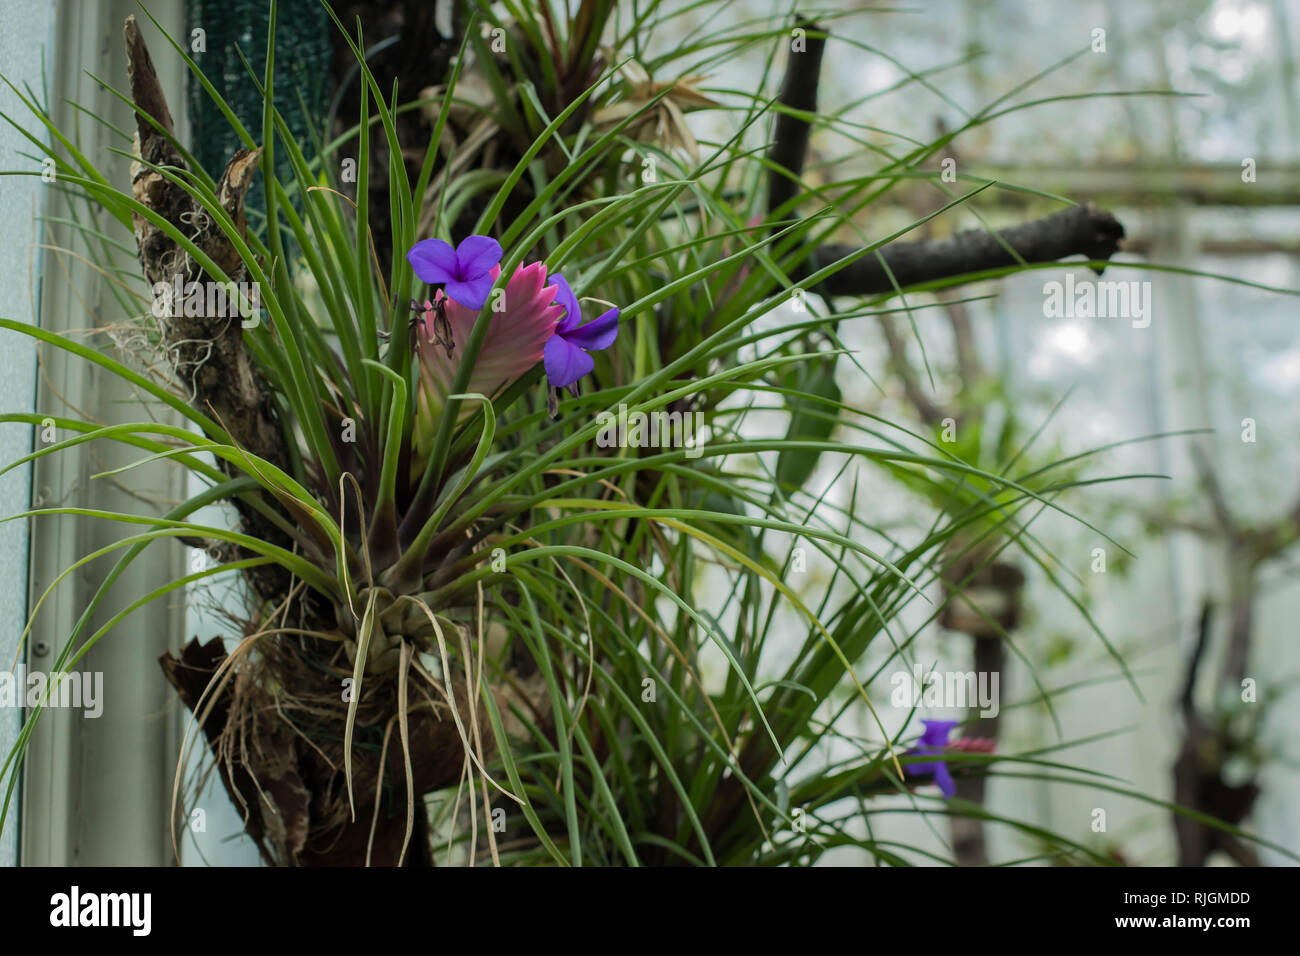 Epiphytic pink quill (Tillandsia cyanea, Wallisia cyanea) with violet flowers Stock Photo